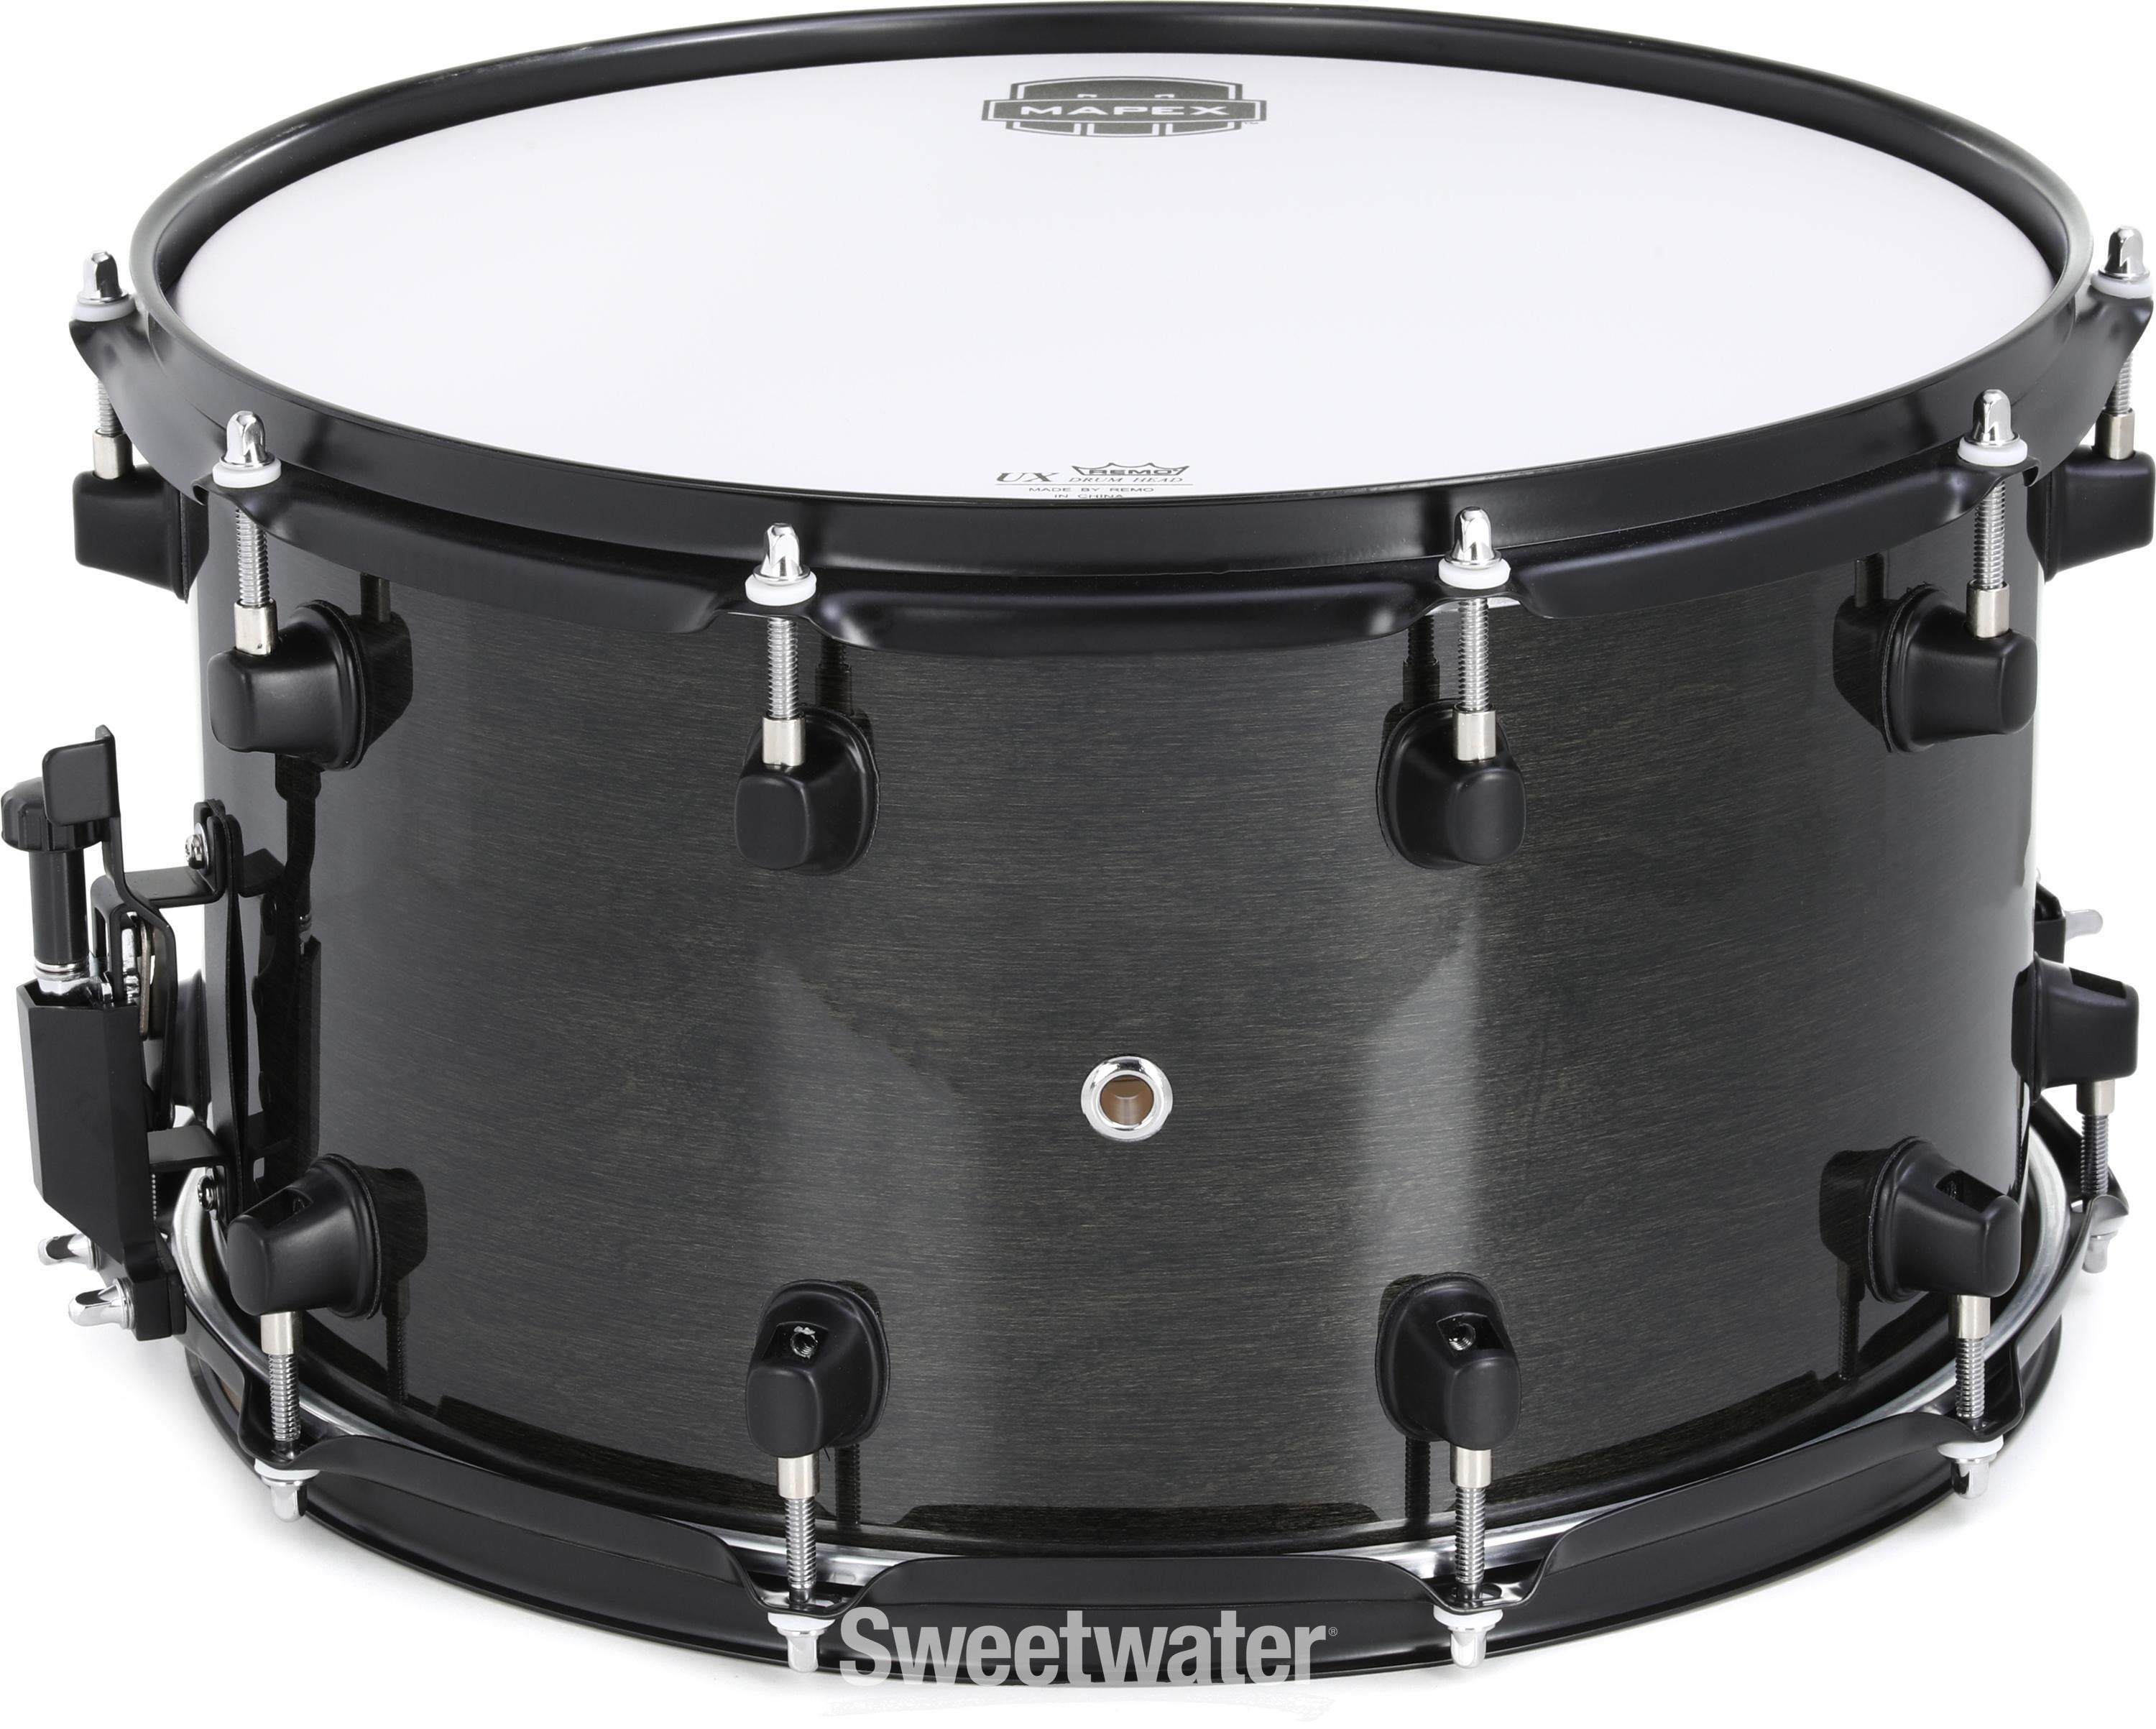 The Maple 8x14 Snare Drum Red Spkl-